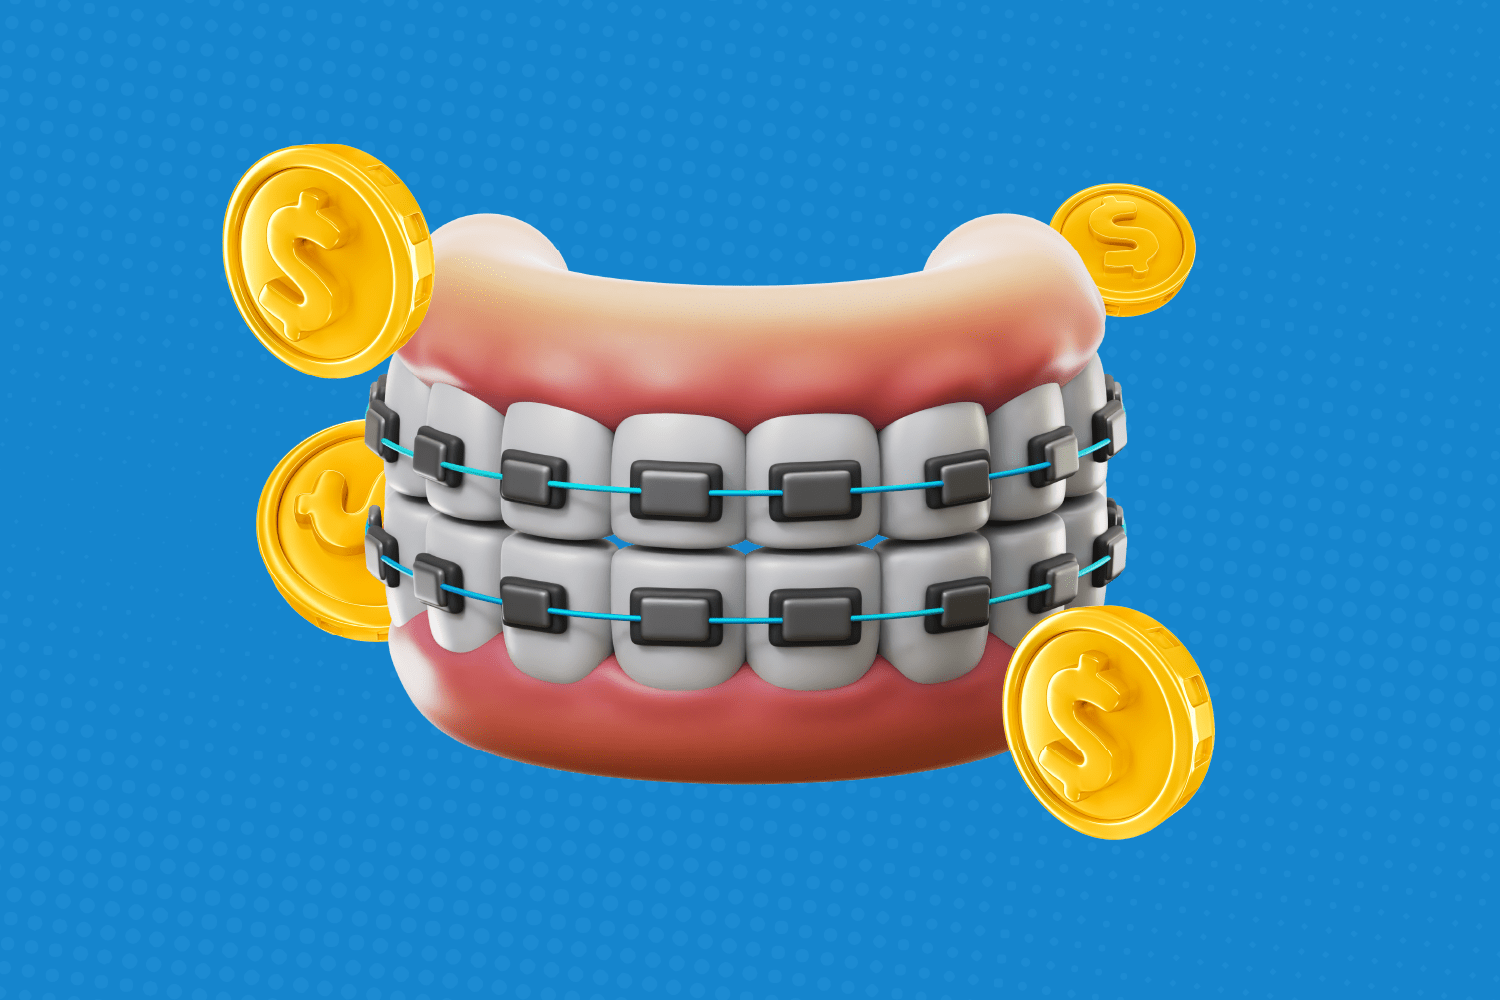 https://somosdental.com/wp-content/uploads/2023/02/3D-illustration-of-a-set-of-teeth-with-braces-surrounded-by-yellow-coins-to-illustrate-how-much-do-braces-cost-in-phoenix.png